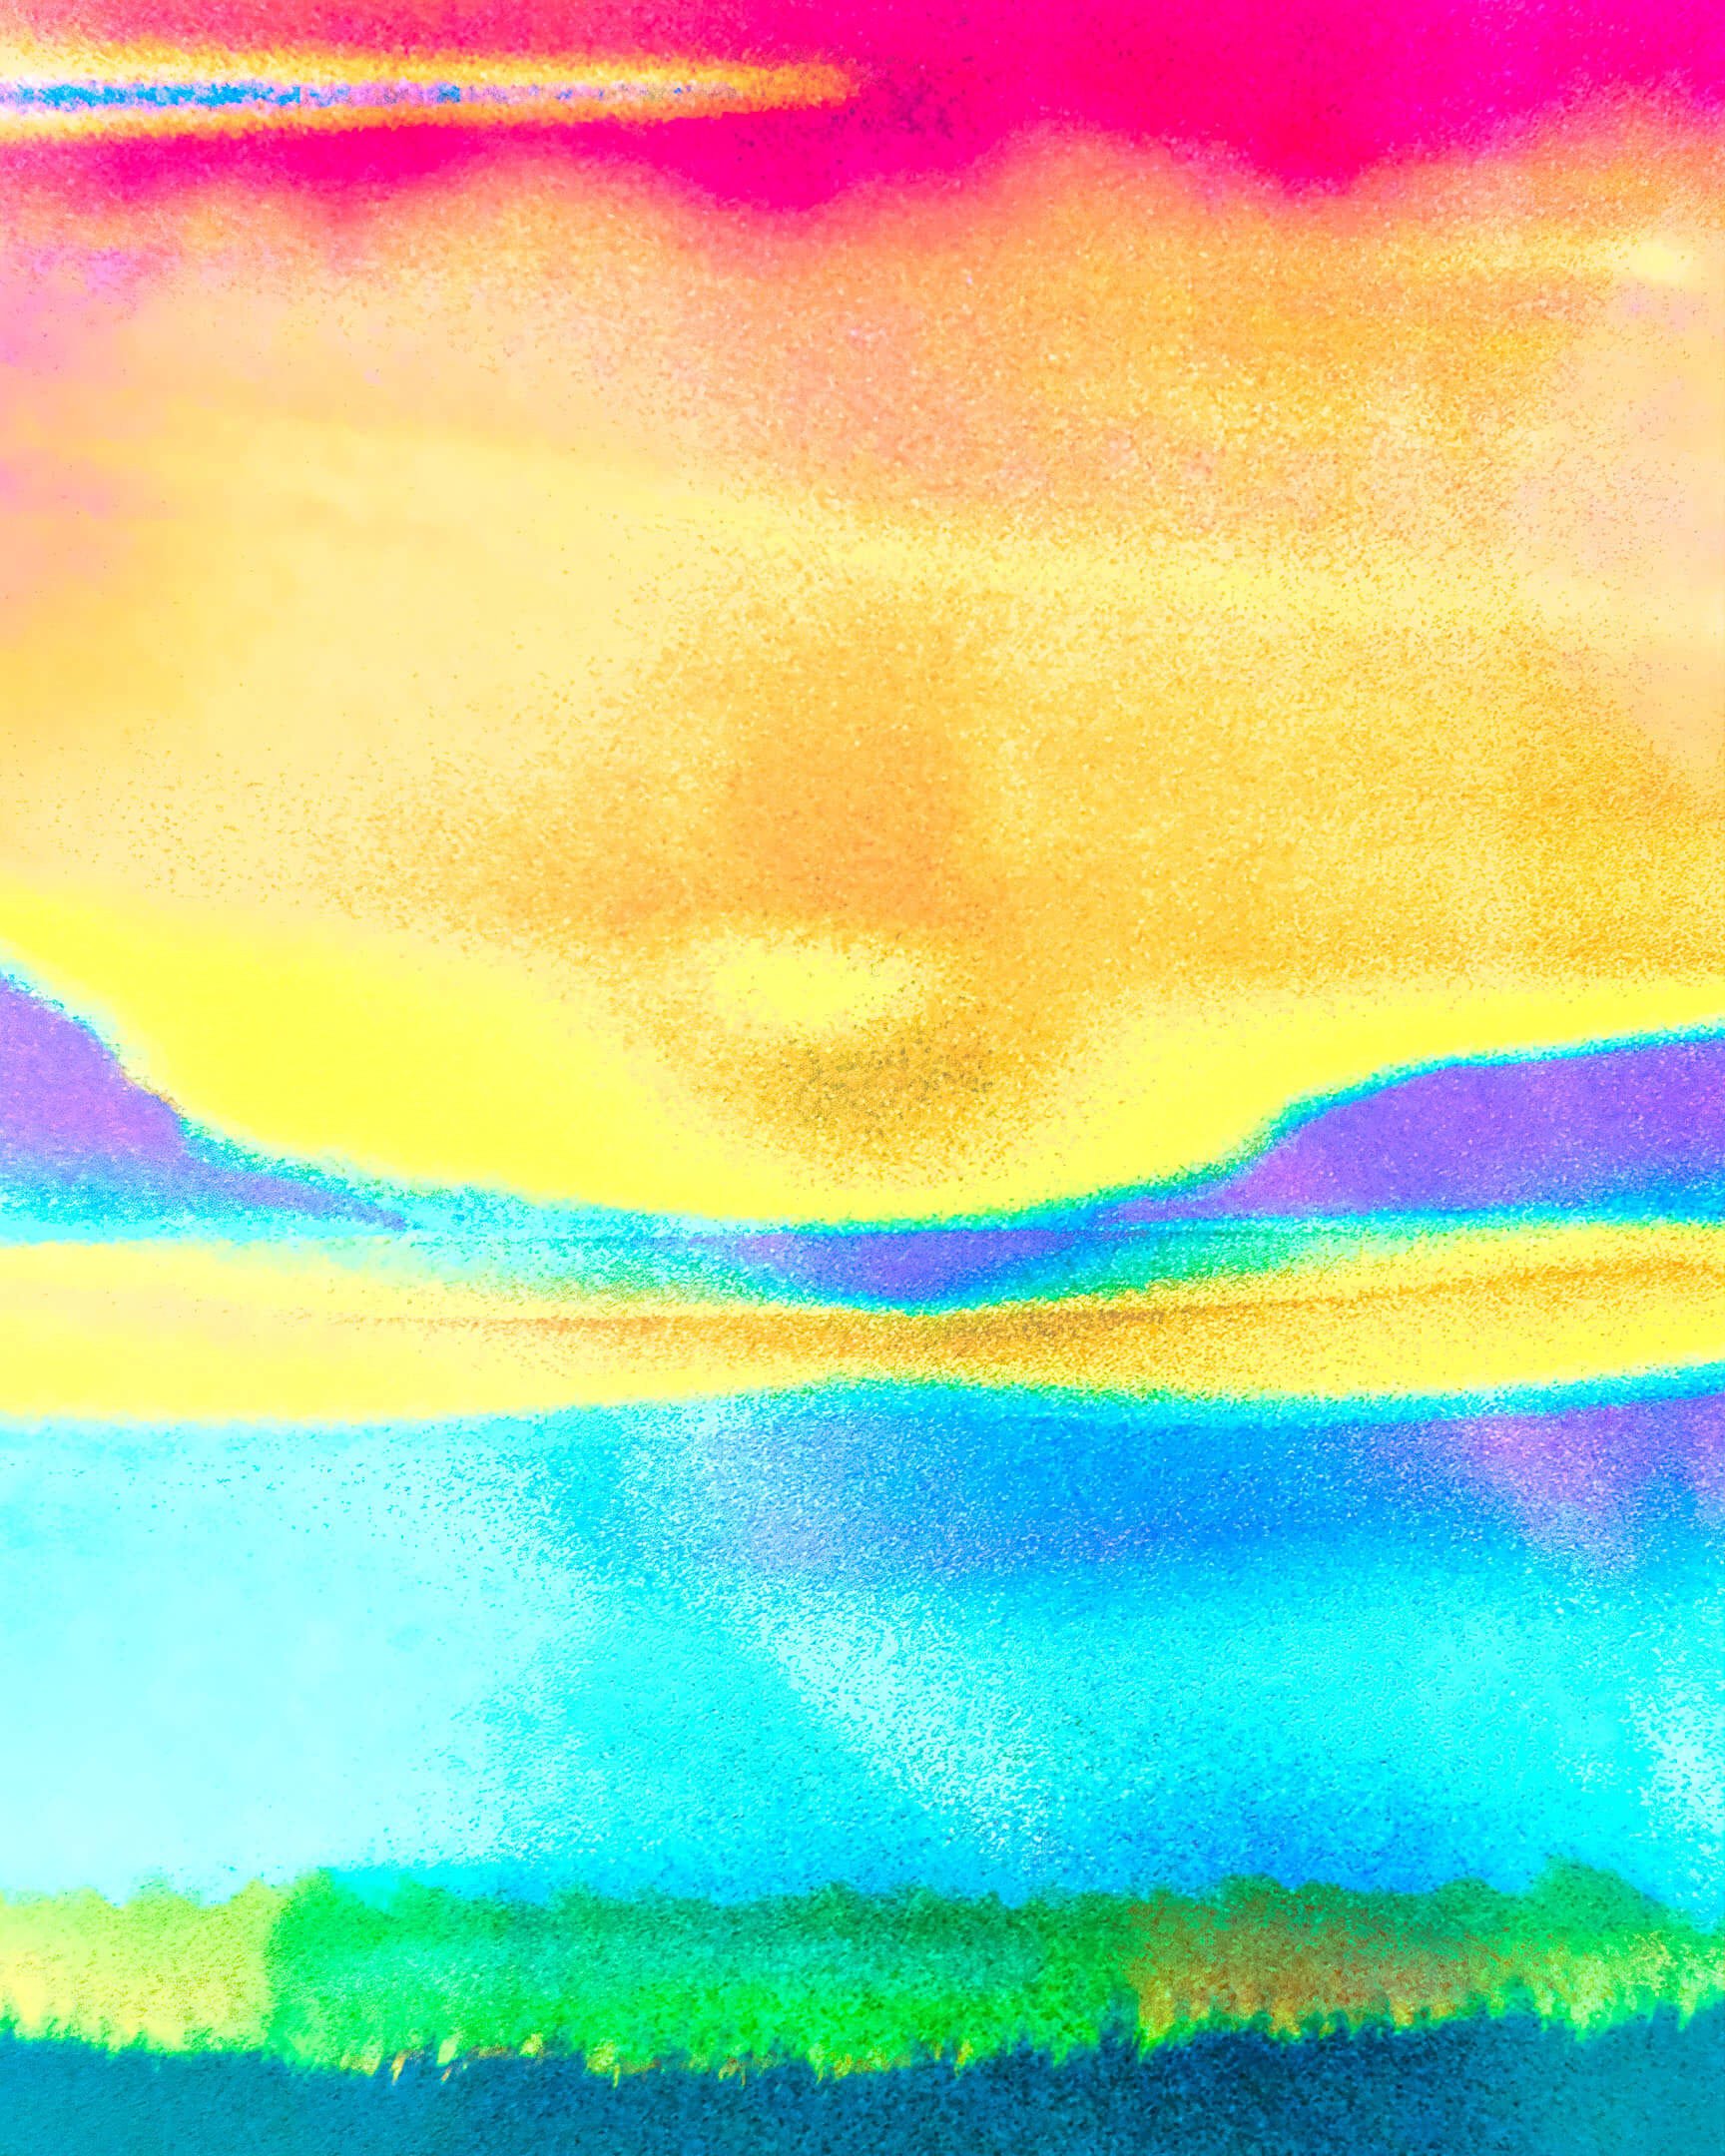 The image is of "Raising Energy I," an artwork that displays a vibrant spectrum of colours, with a bright yellow centre fading into blue at the bottom and a pink hue at the top. The colours are layered with horizontal bands that create a sense of movement, like waves of emotion. The lower part features a denser texture, giving the impression of a lush, lively field. This piece evokes a mix of hope and apprehension, embodying the complex feelings brought on by challenging times.